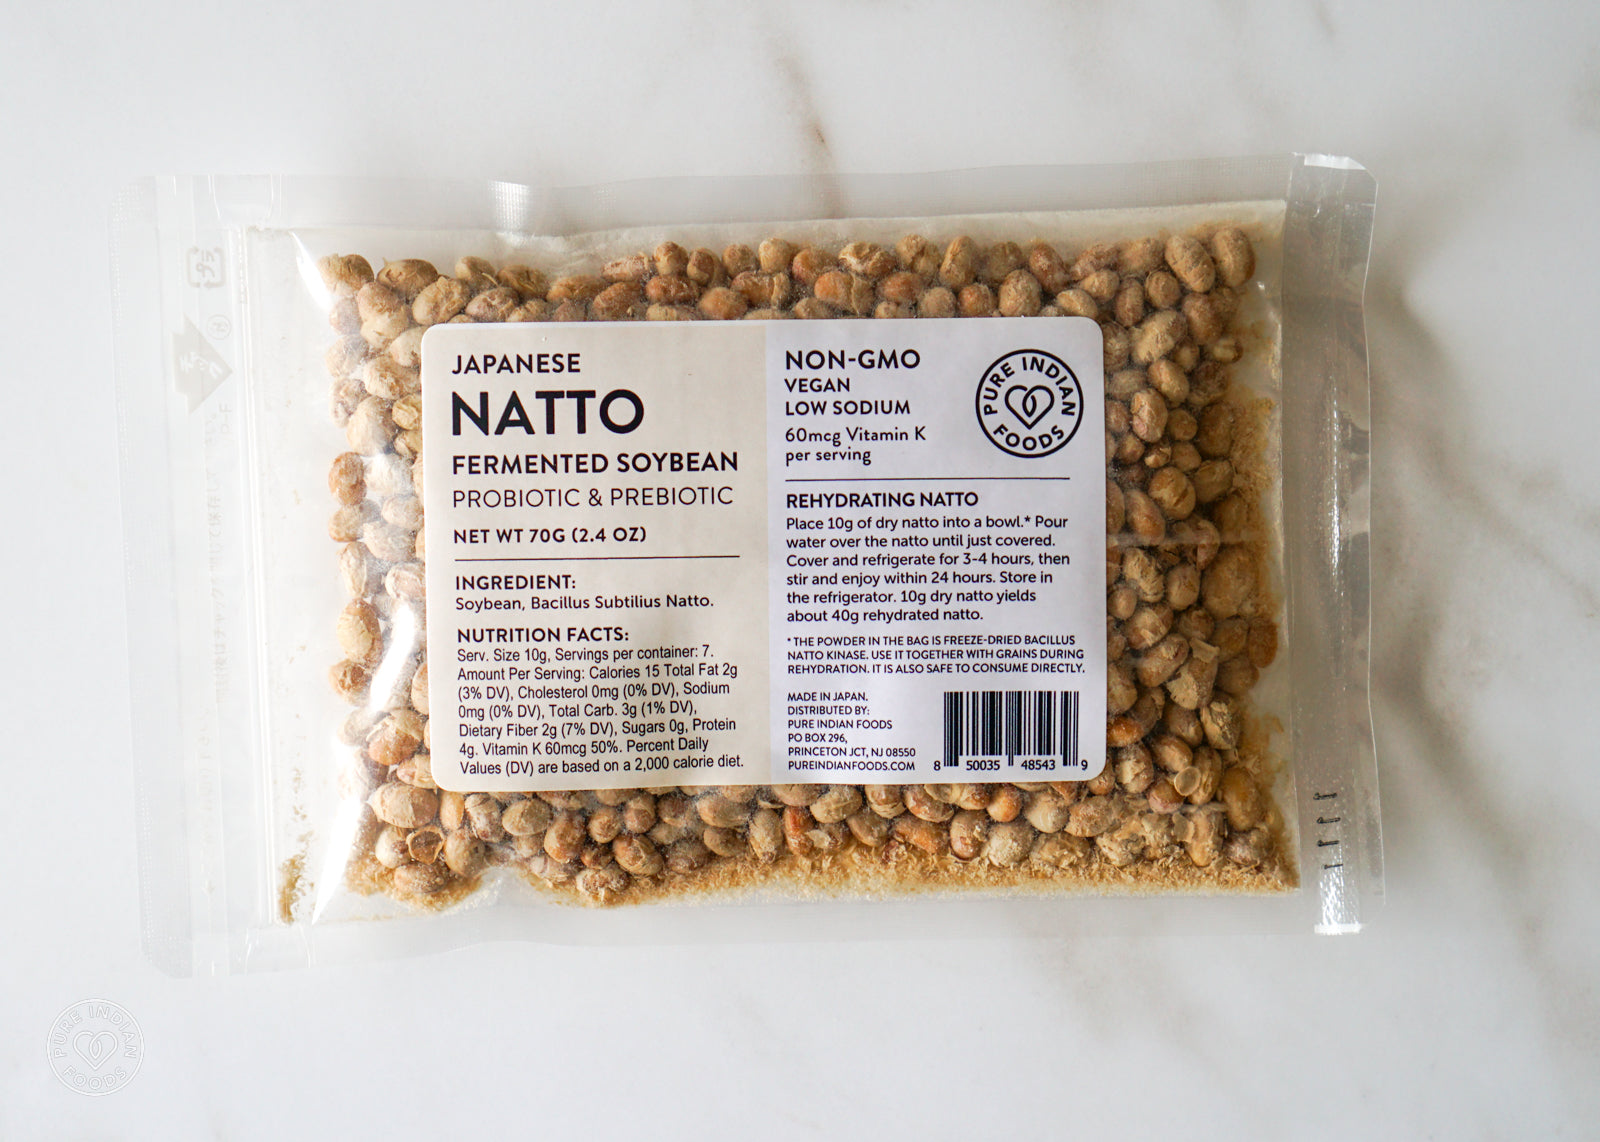 A bag of Pure Indian Foods freeze-dried Japanese natto beans. Label says it's non-gmo natto soybeans, vegan, and low-sodium